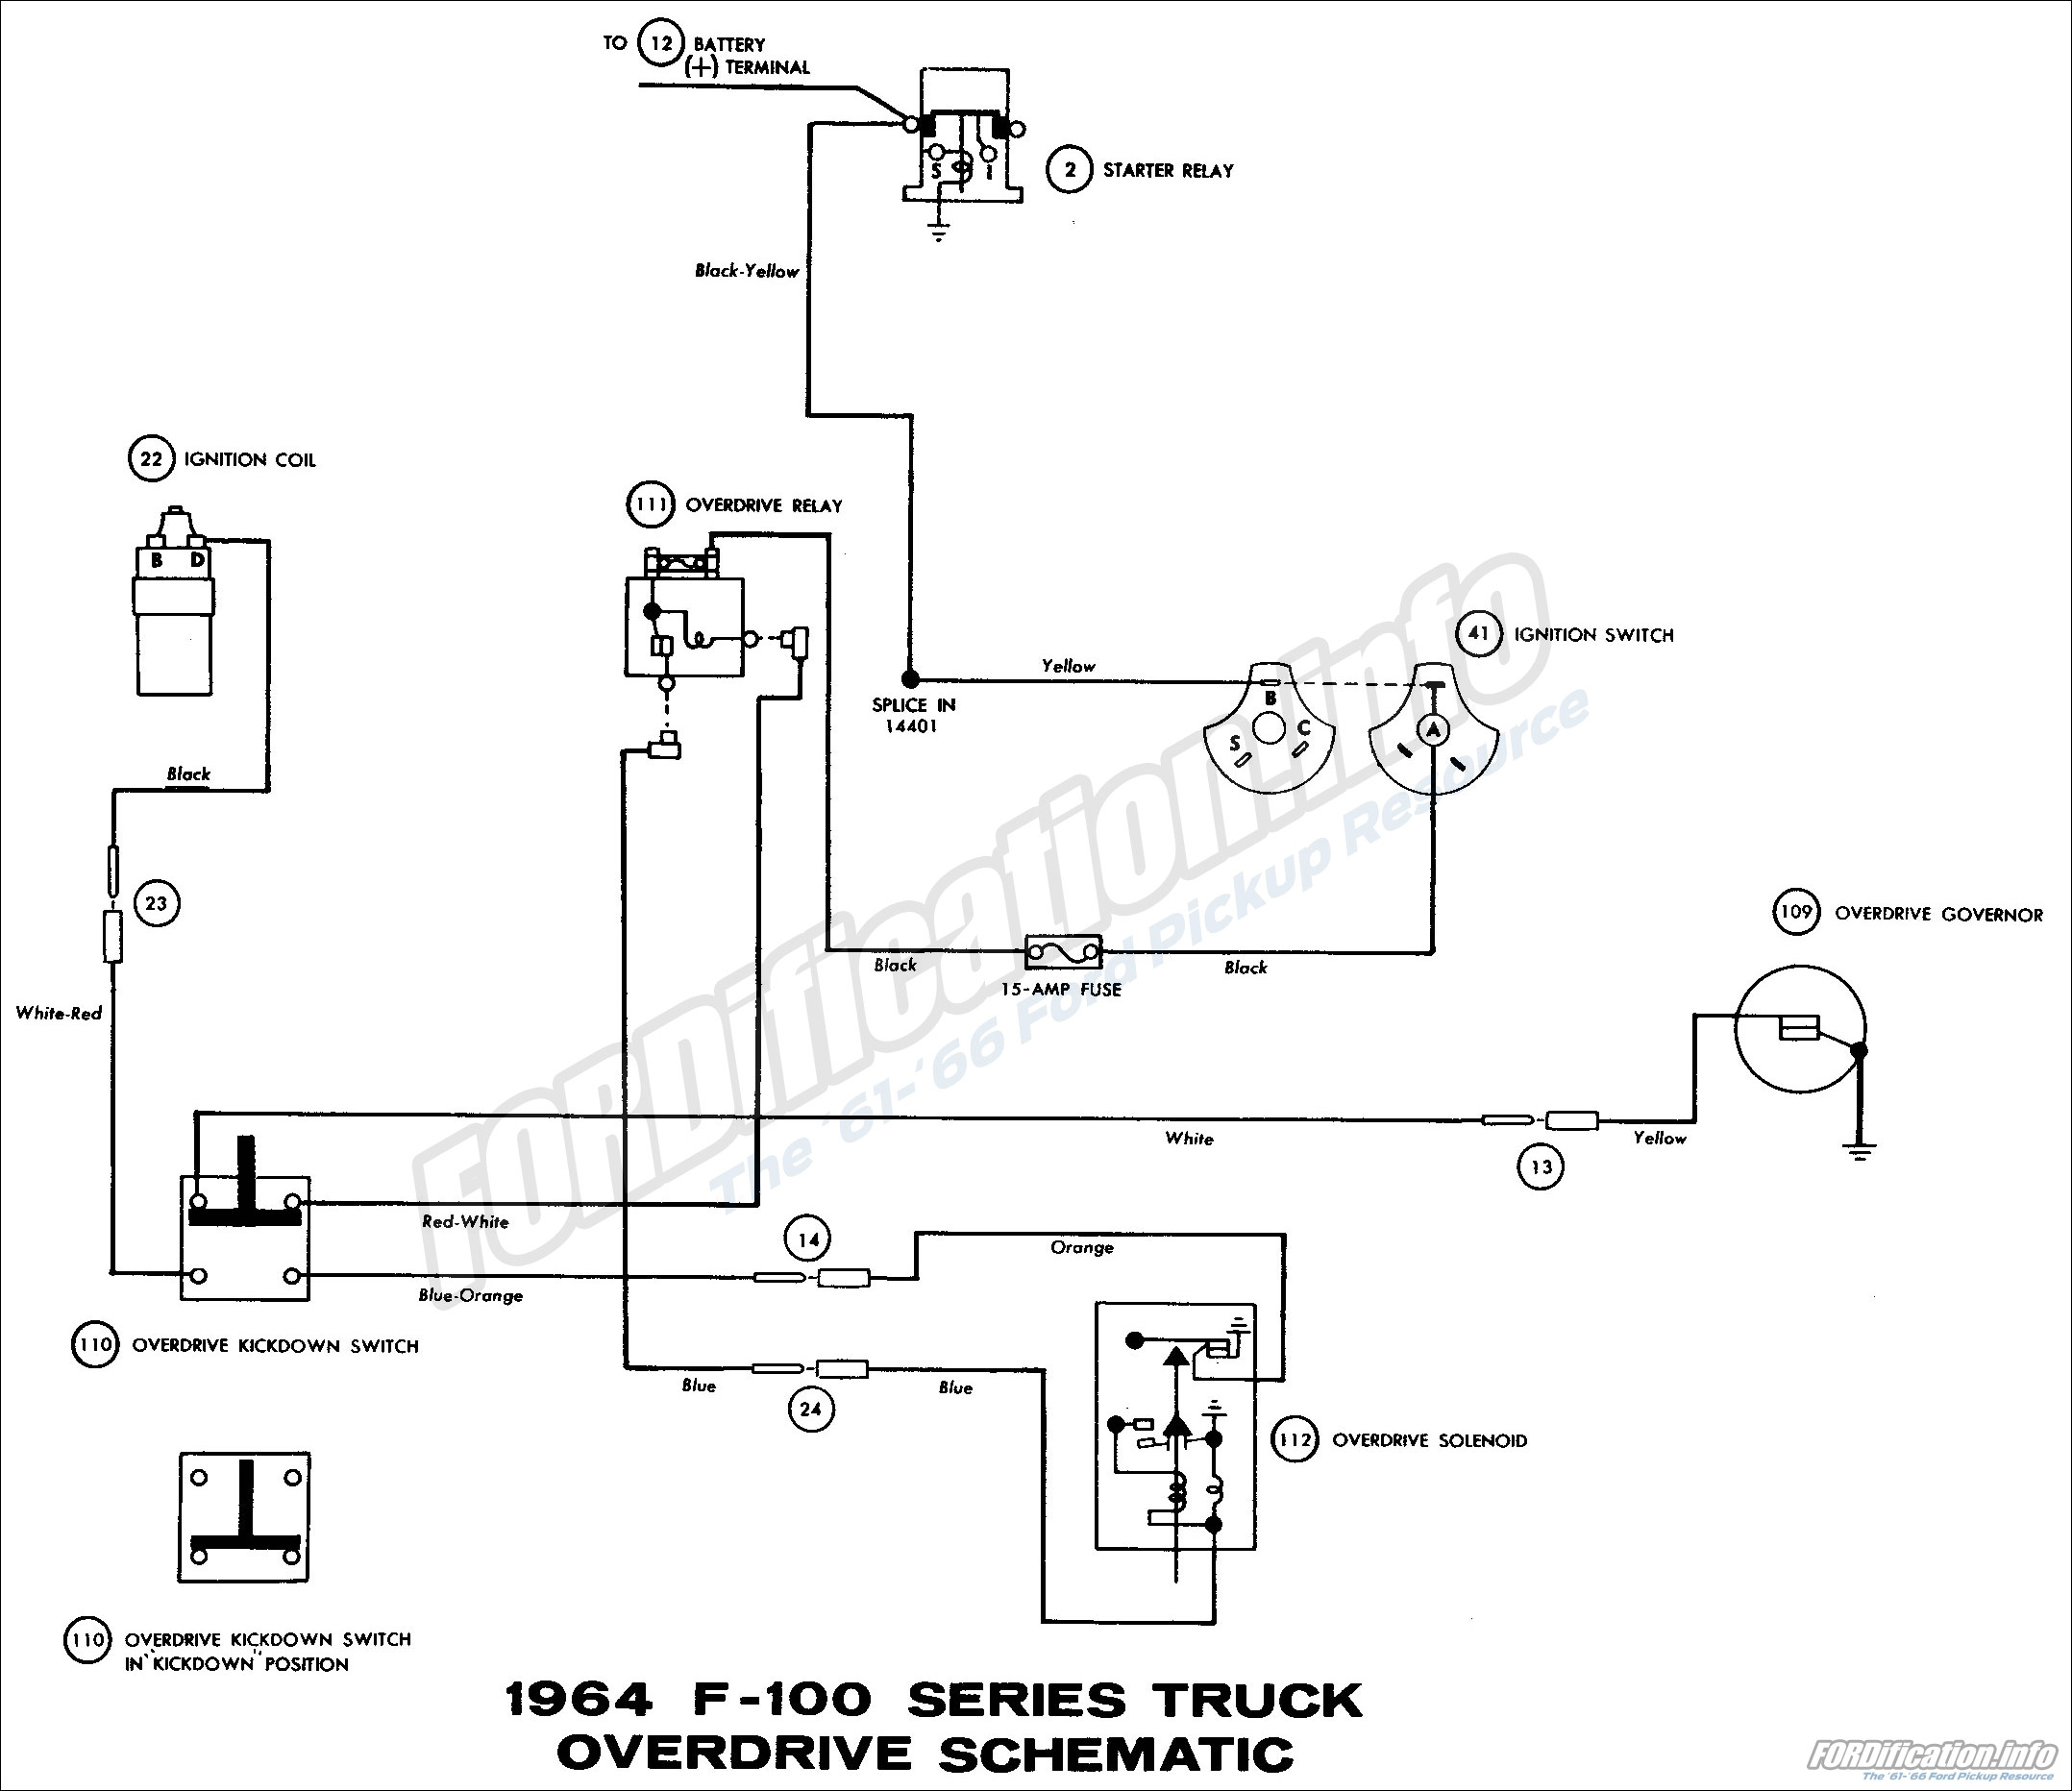 1964 Ford Truck Wiring Diagrams - FORDification.info - The ... basic ignition wiring diagram 1964 dodge 